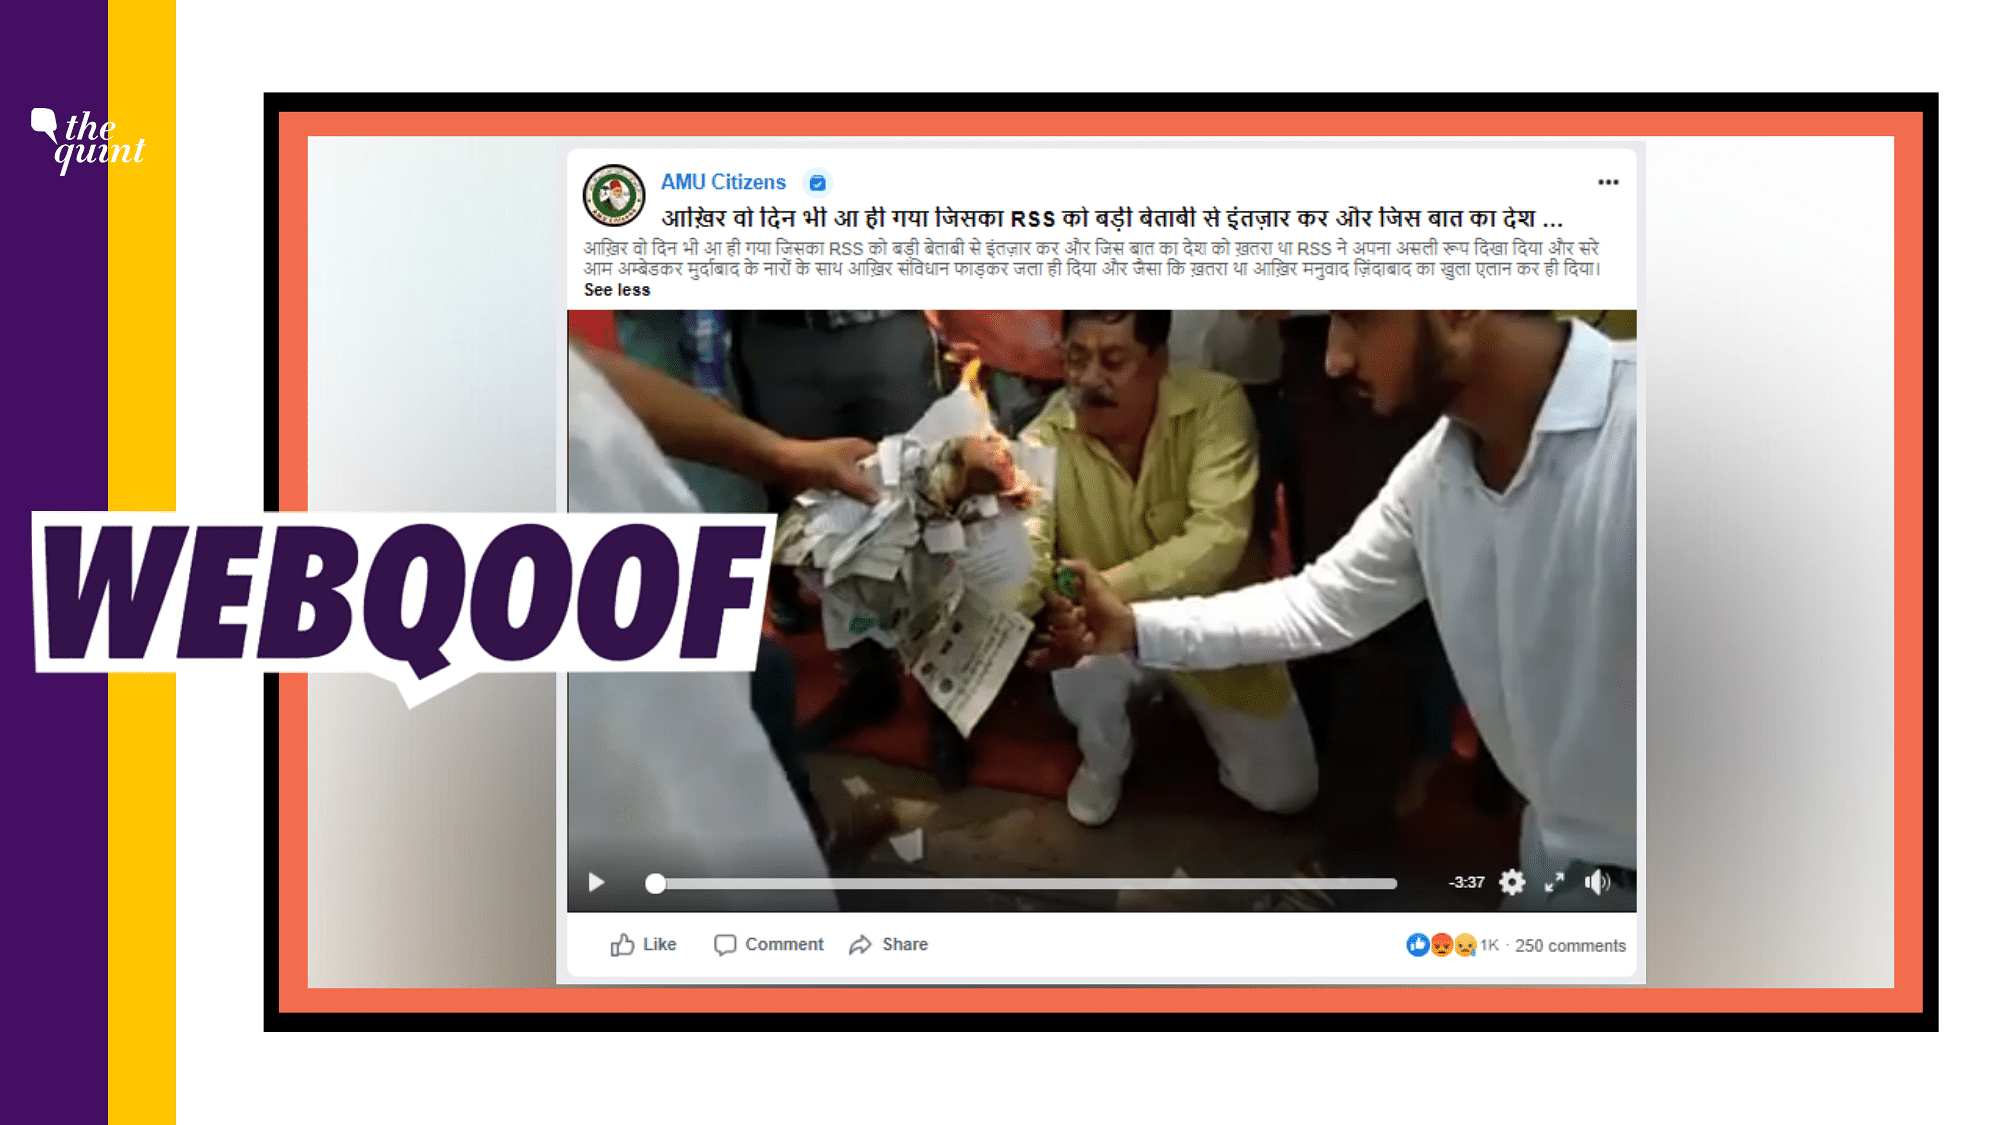 An old video from 2018 is being circulated with a claim that RSS people are burning the constitution.